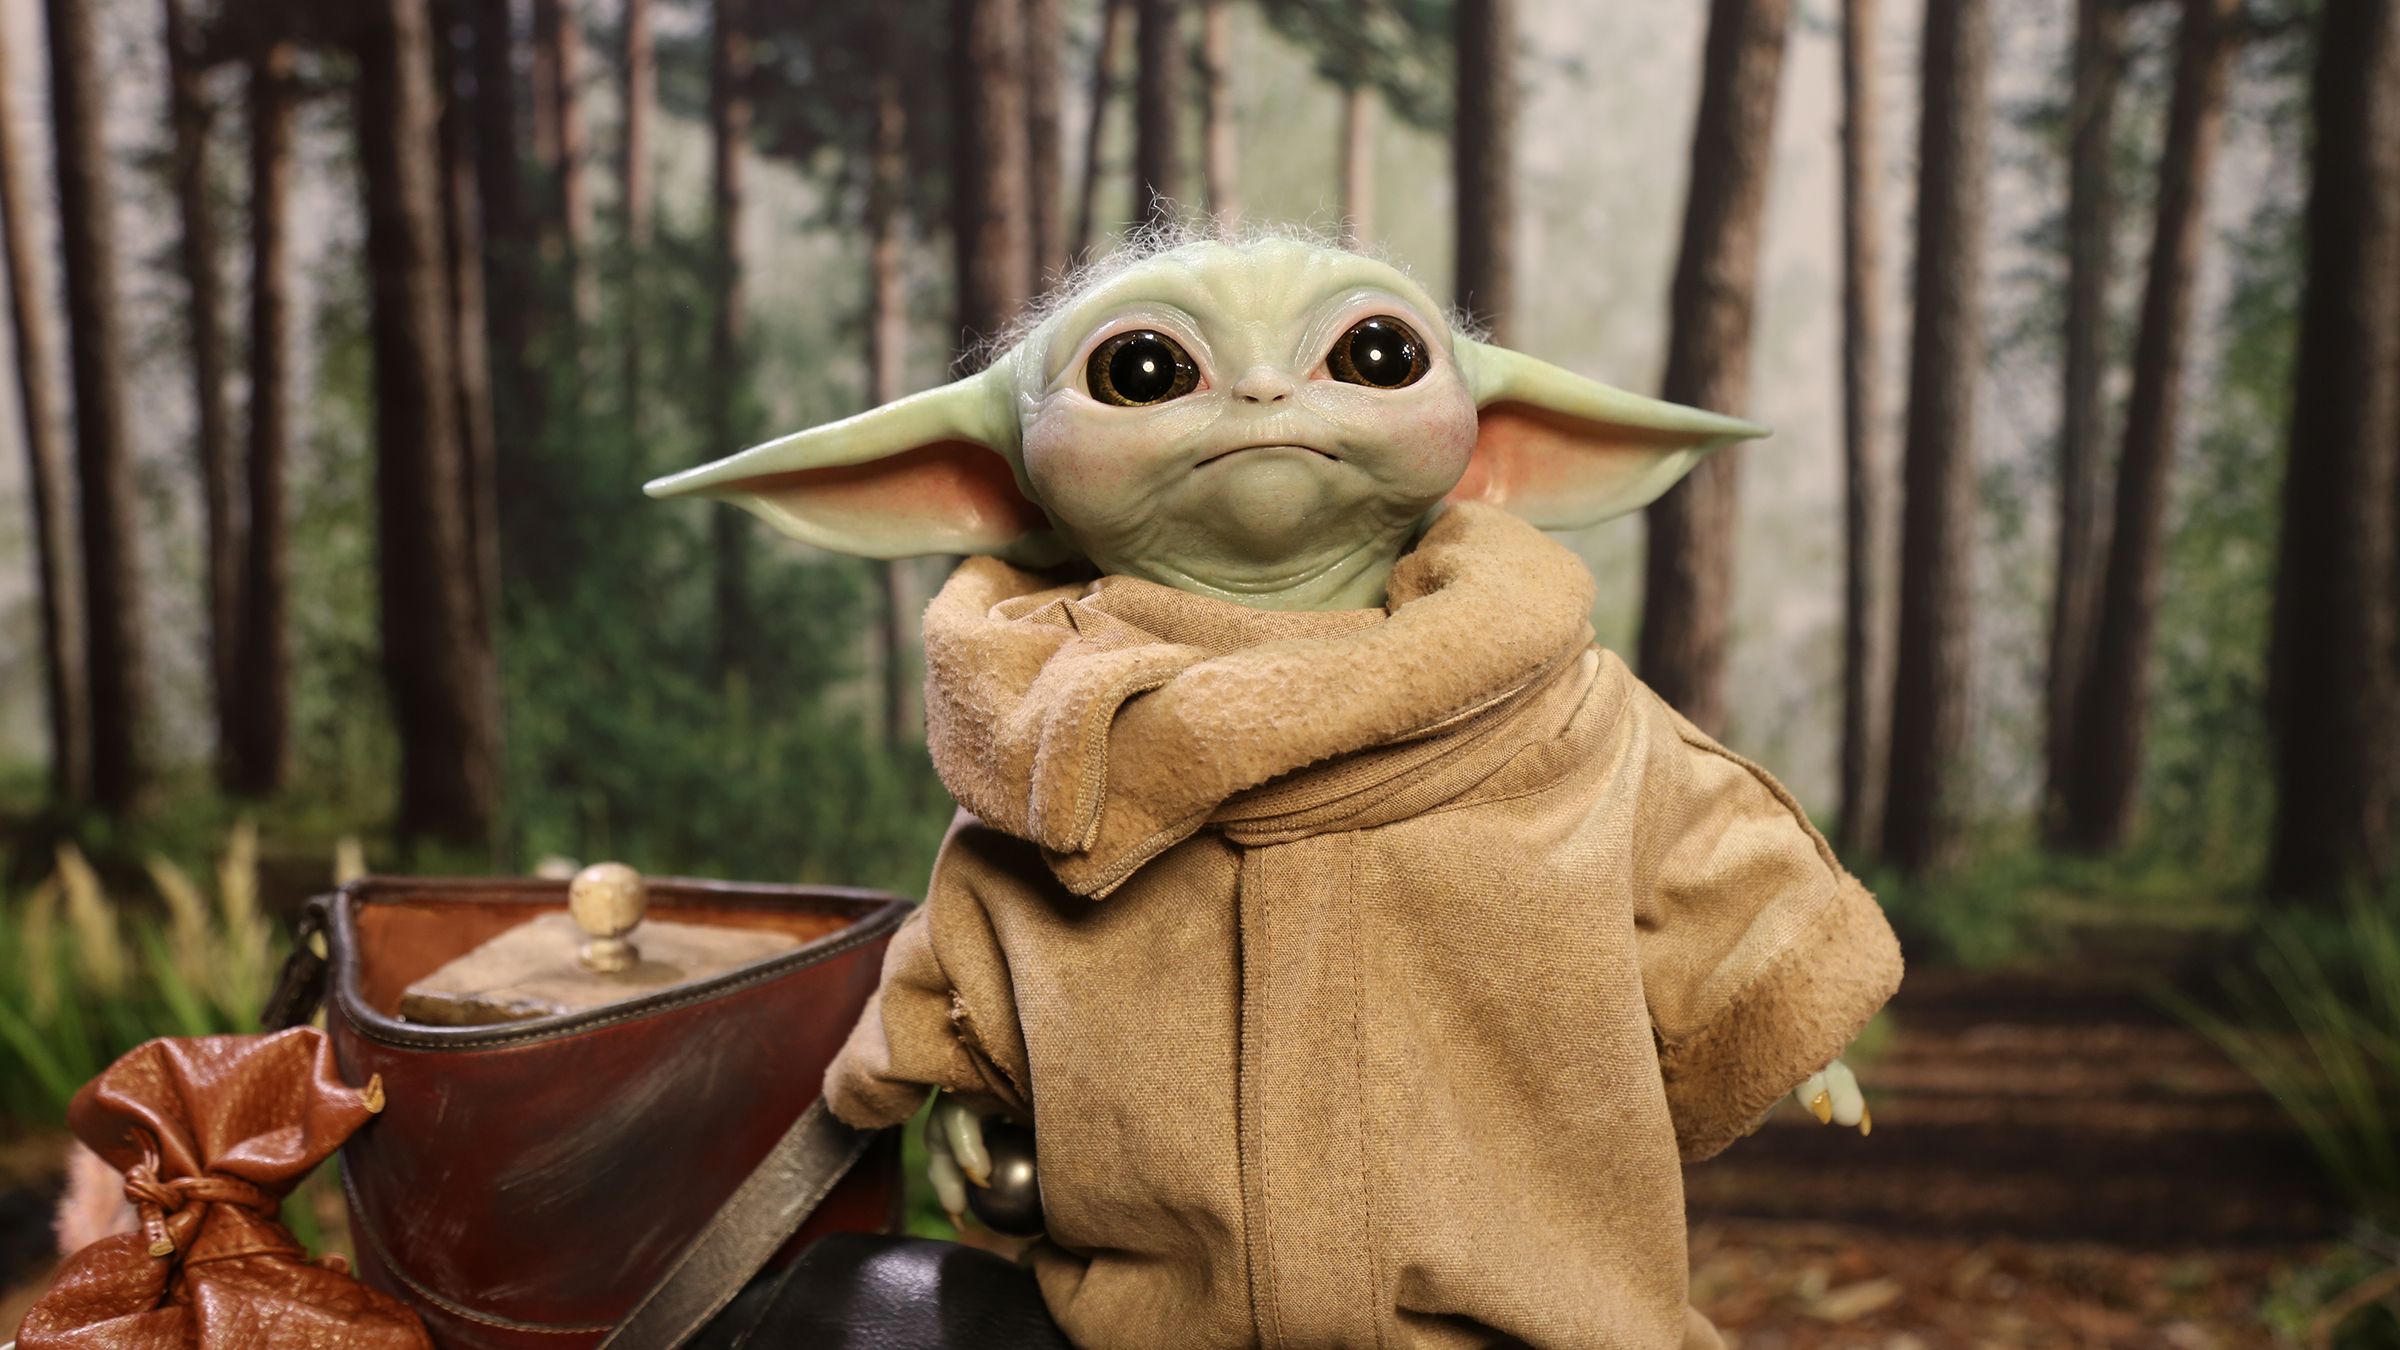 This Baby Yoda Life-Size Figure Has Come For Your Wallet ...